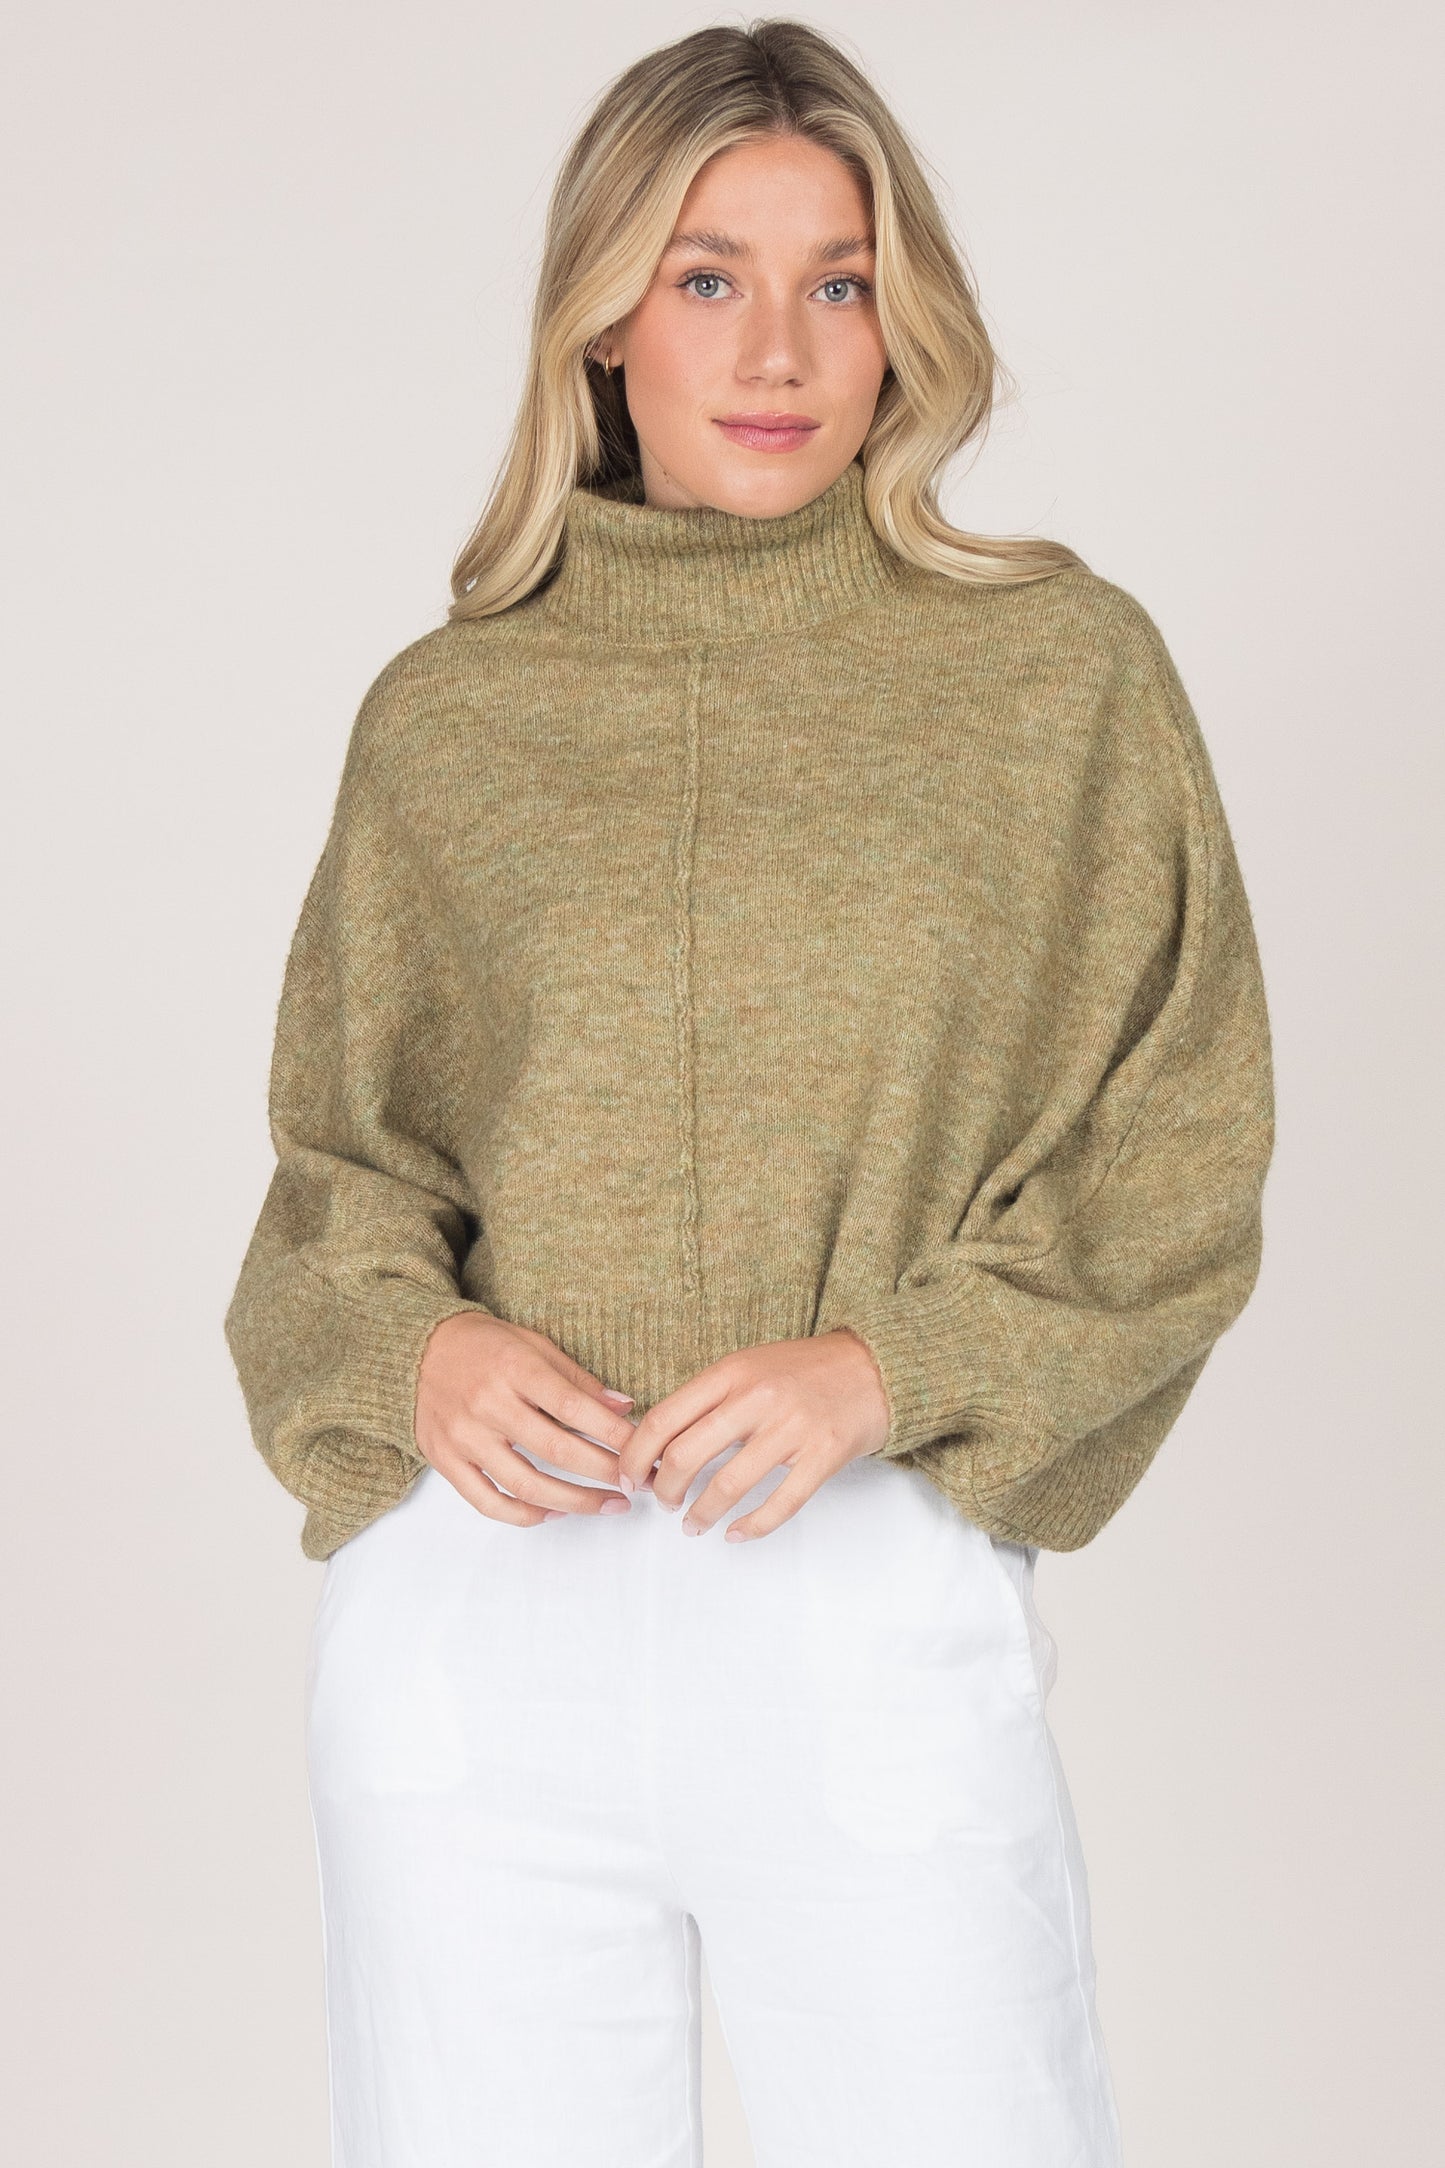 Poncho Perfection Sweater